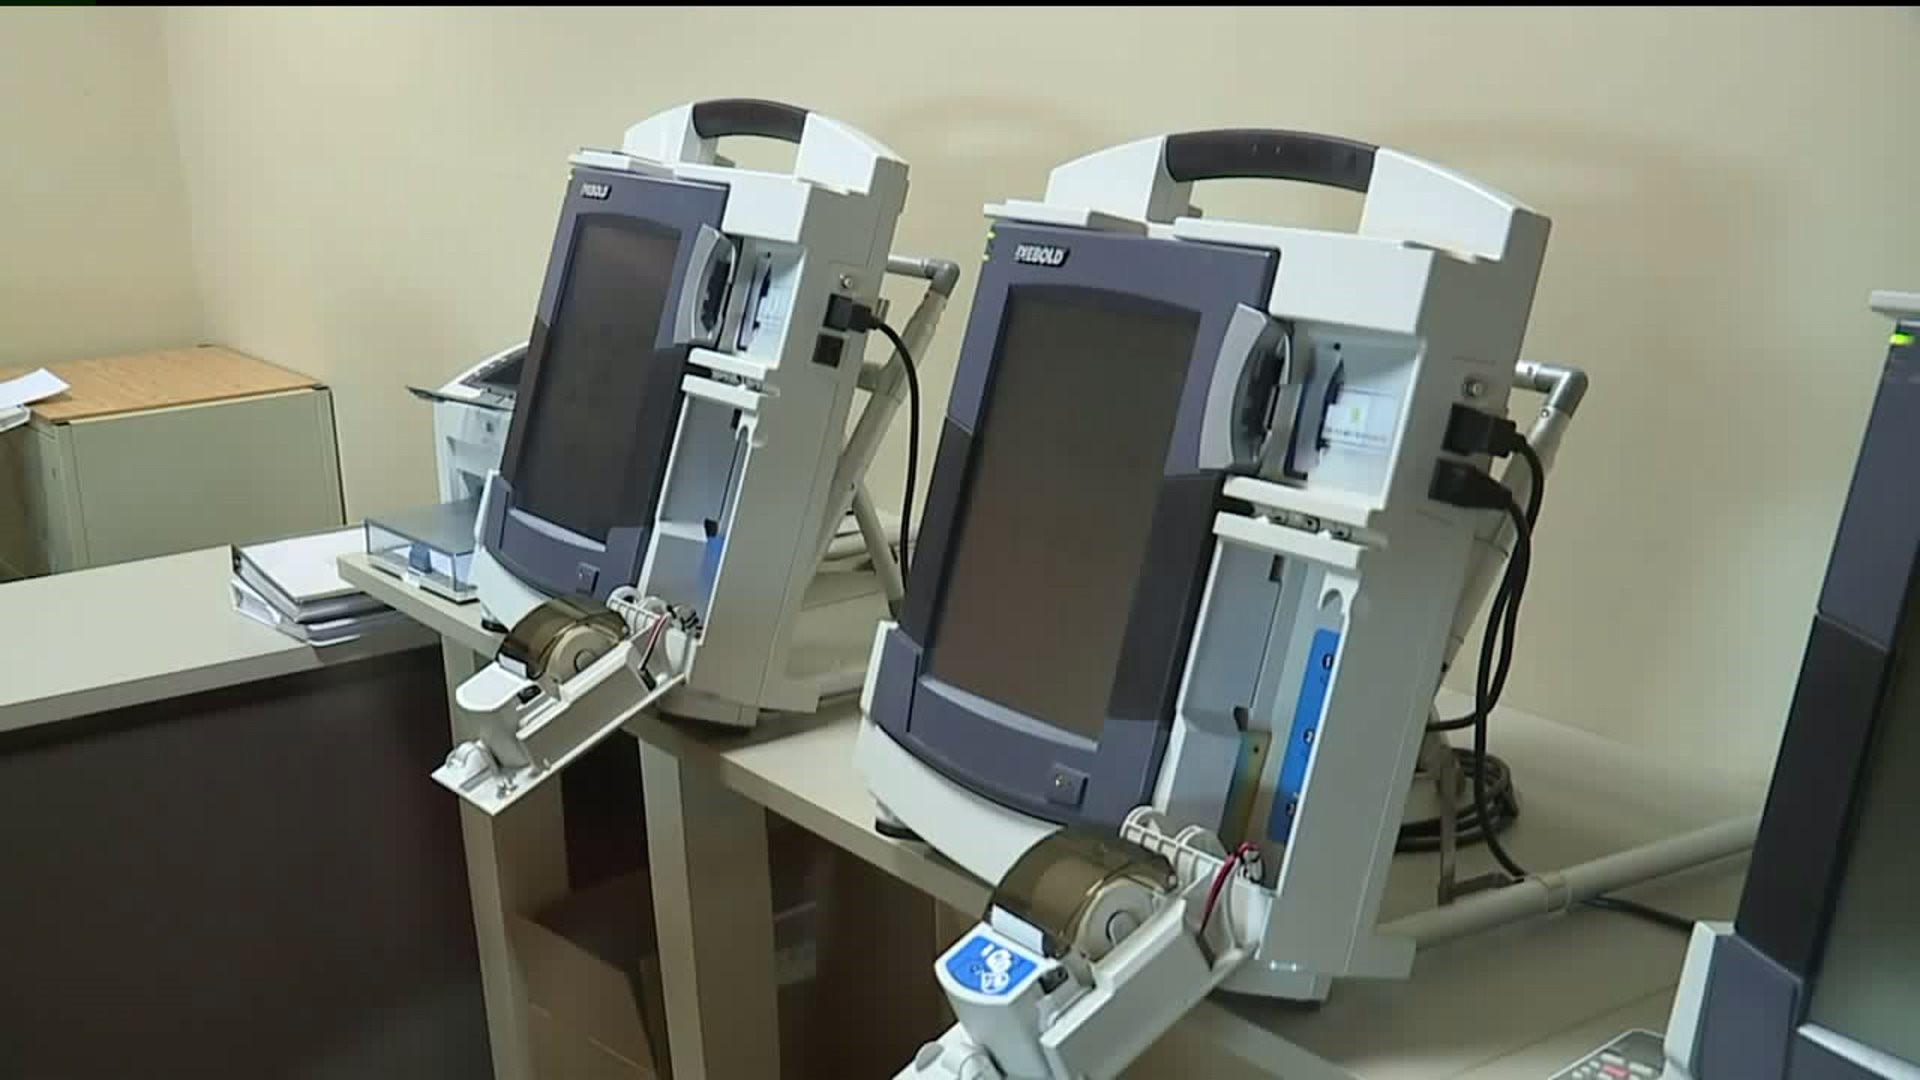 Counties to Replace Voting Machines